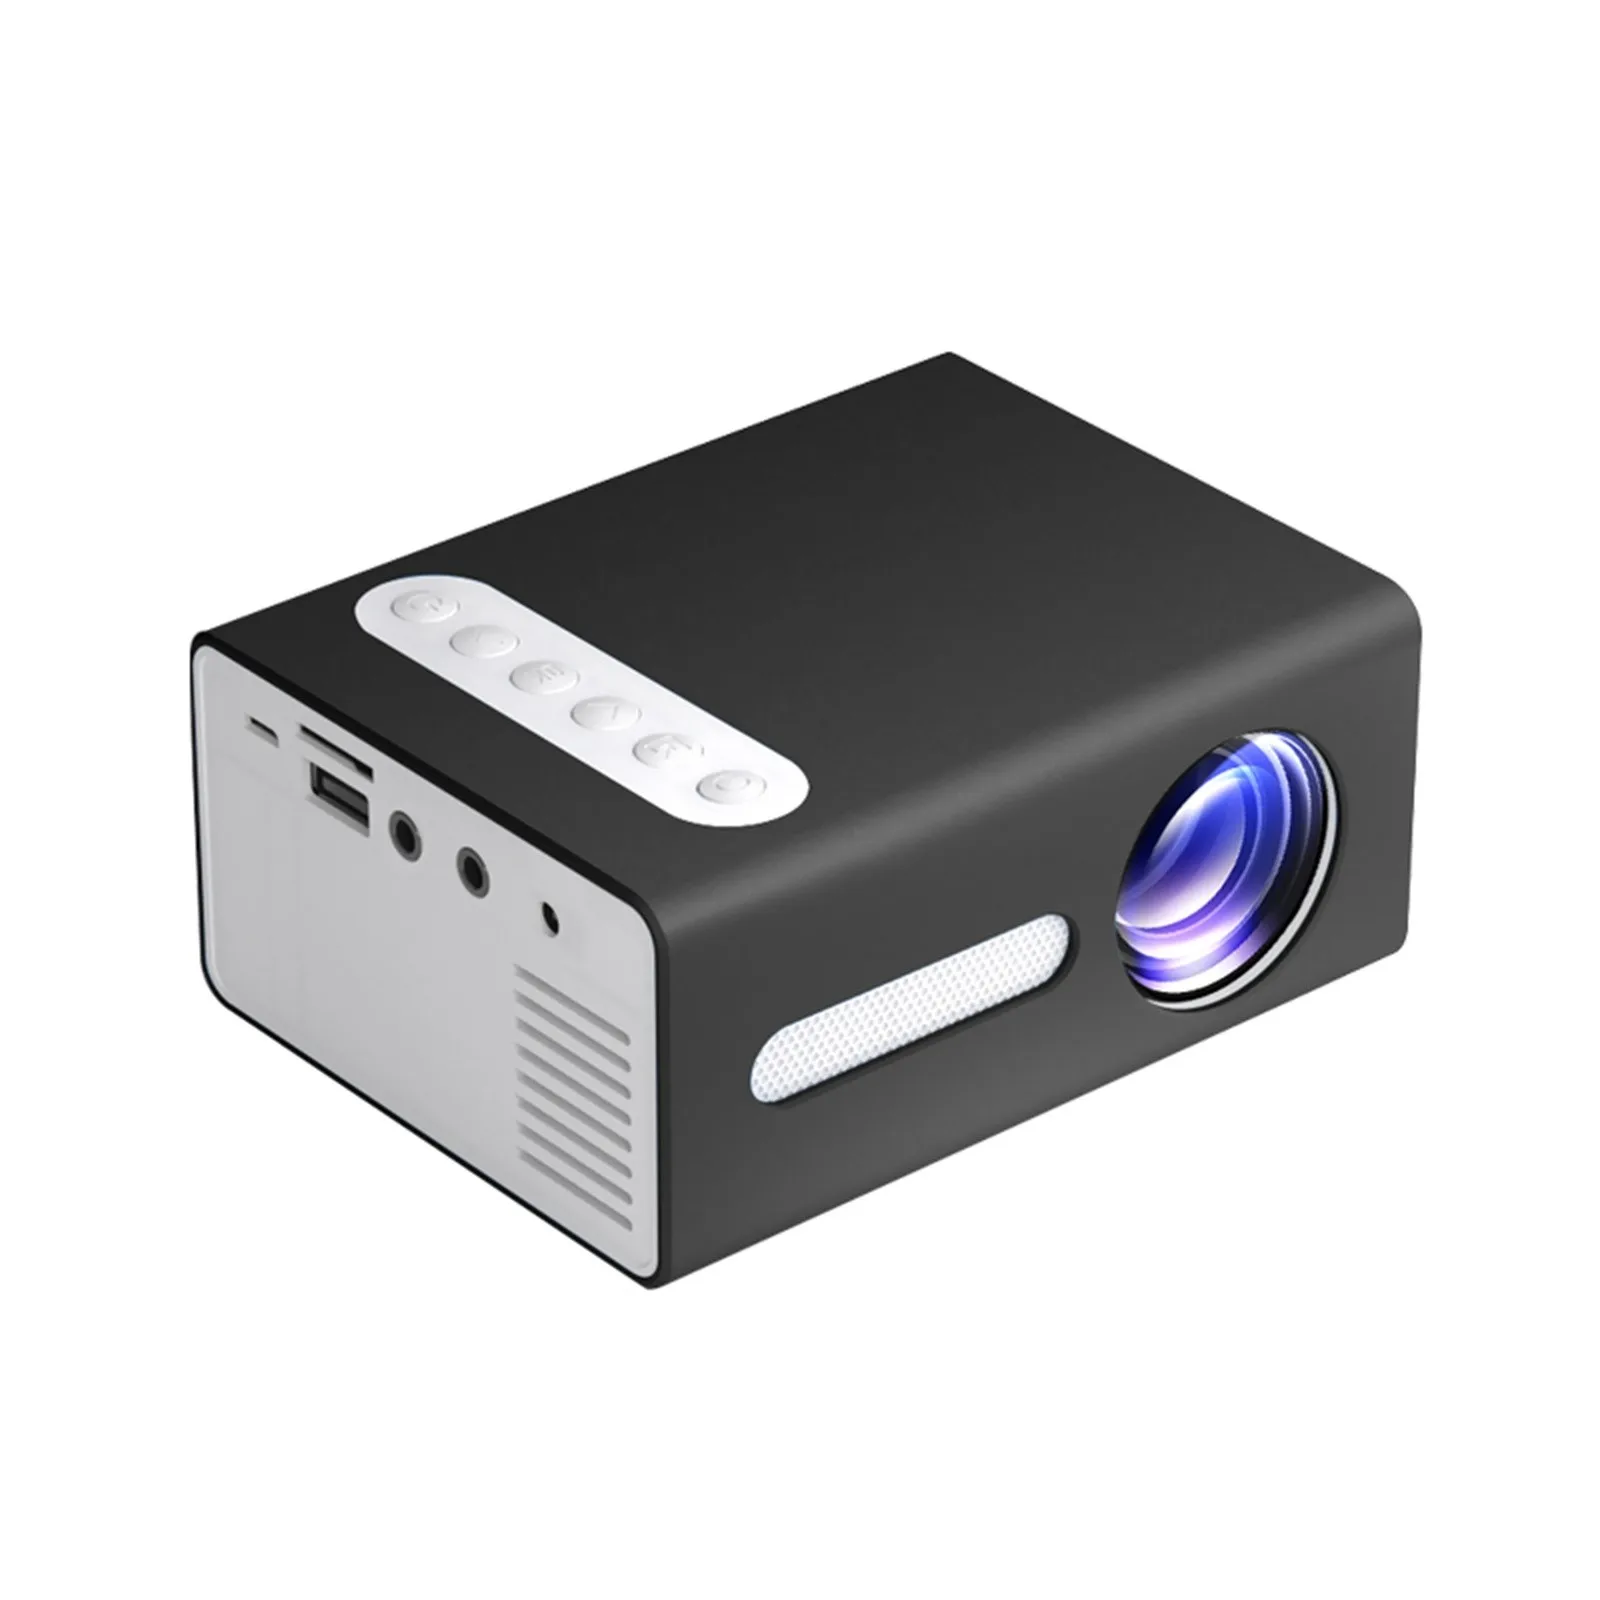 Mini LED Projector HD 1080p HDMI-compatible USB Audio Home Media Player Beamer Children Gifts Home Movie Theatre System US Plug - ANKUX Tech Co., Ltd